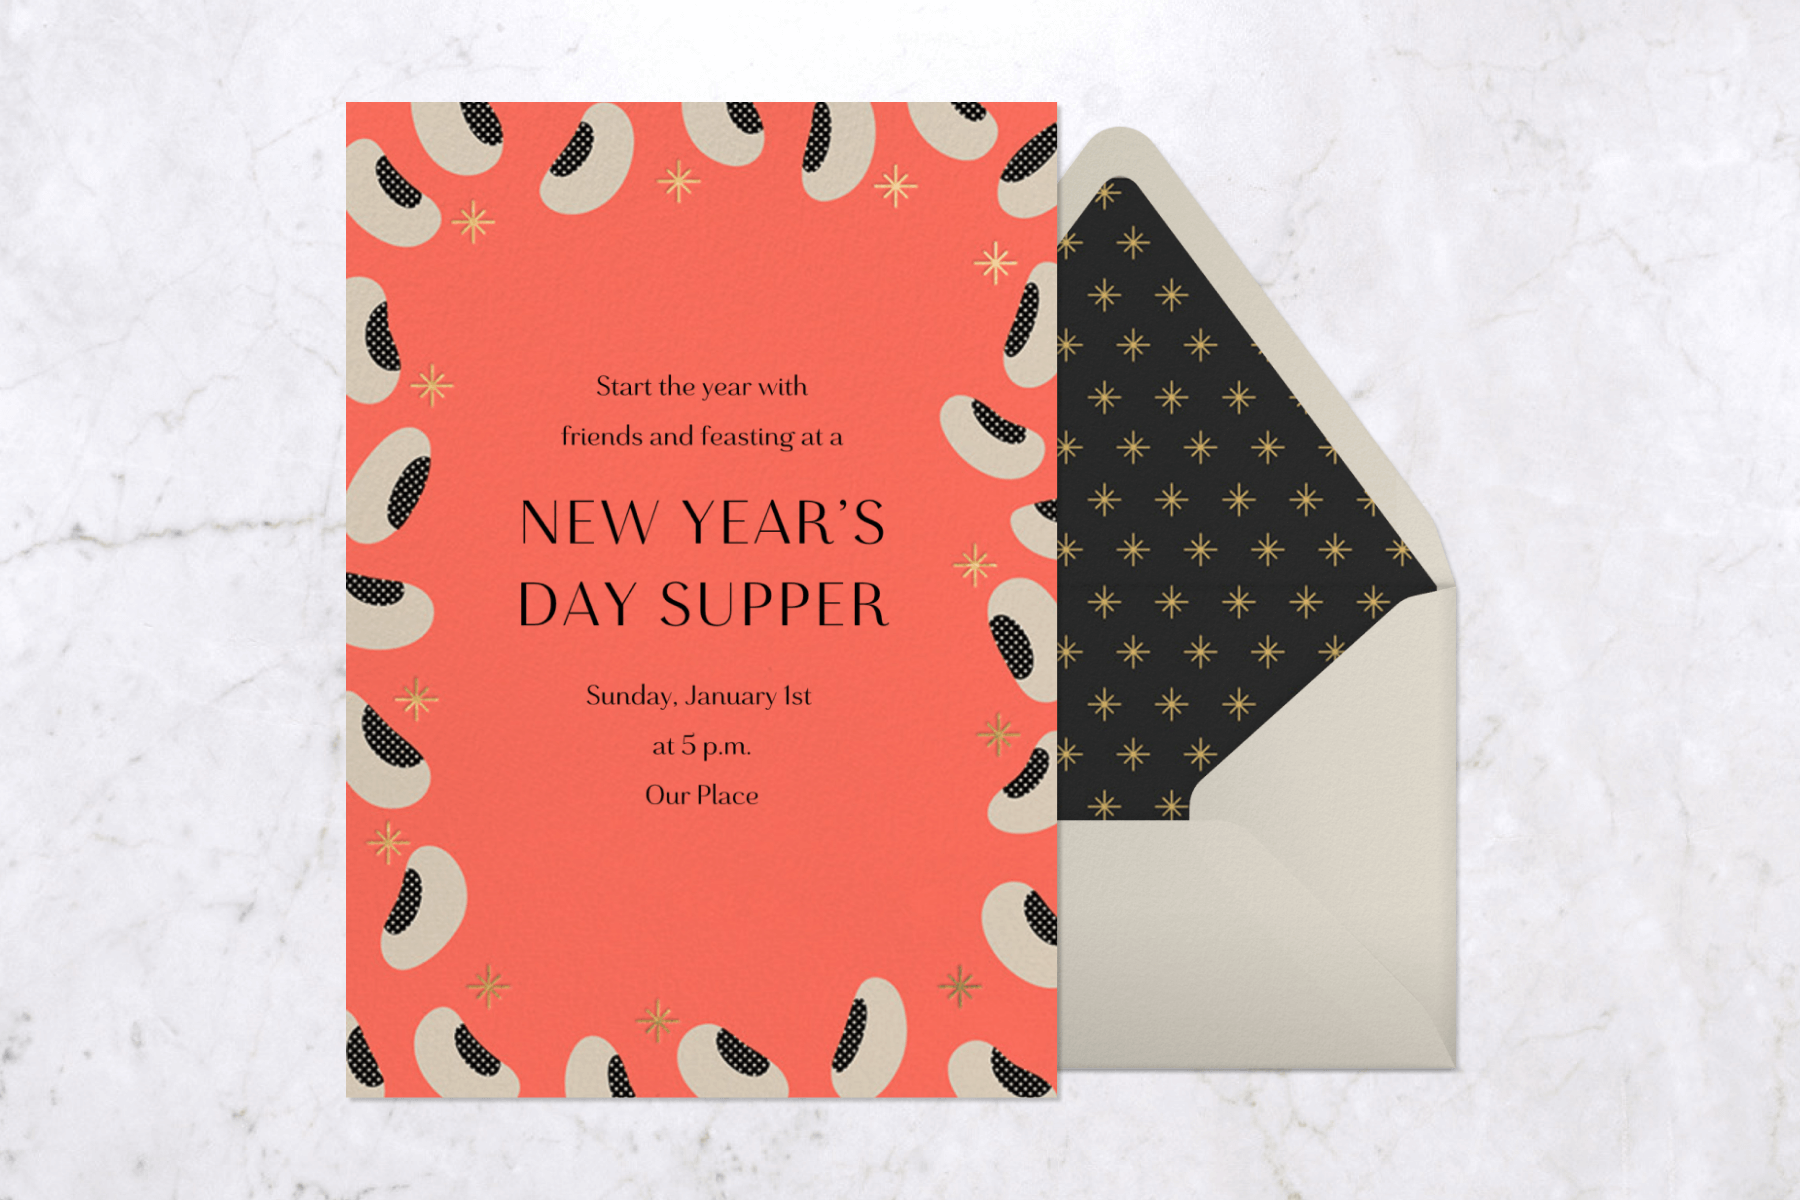 A salmon-colored card with black eyed peas around the border and the words “New Year’s Day Supper.”